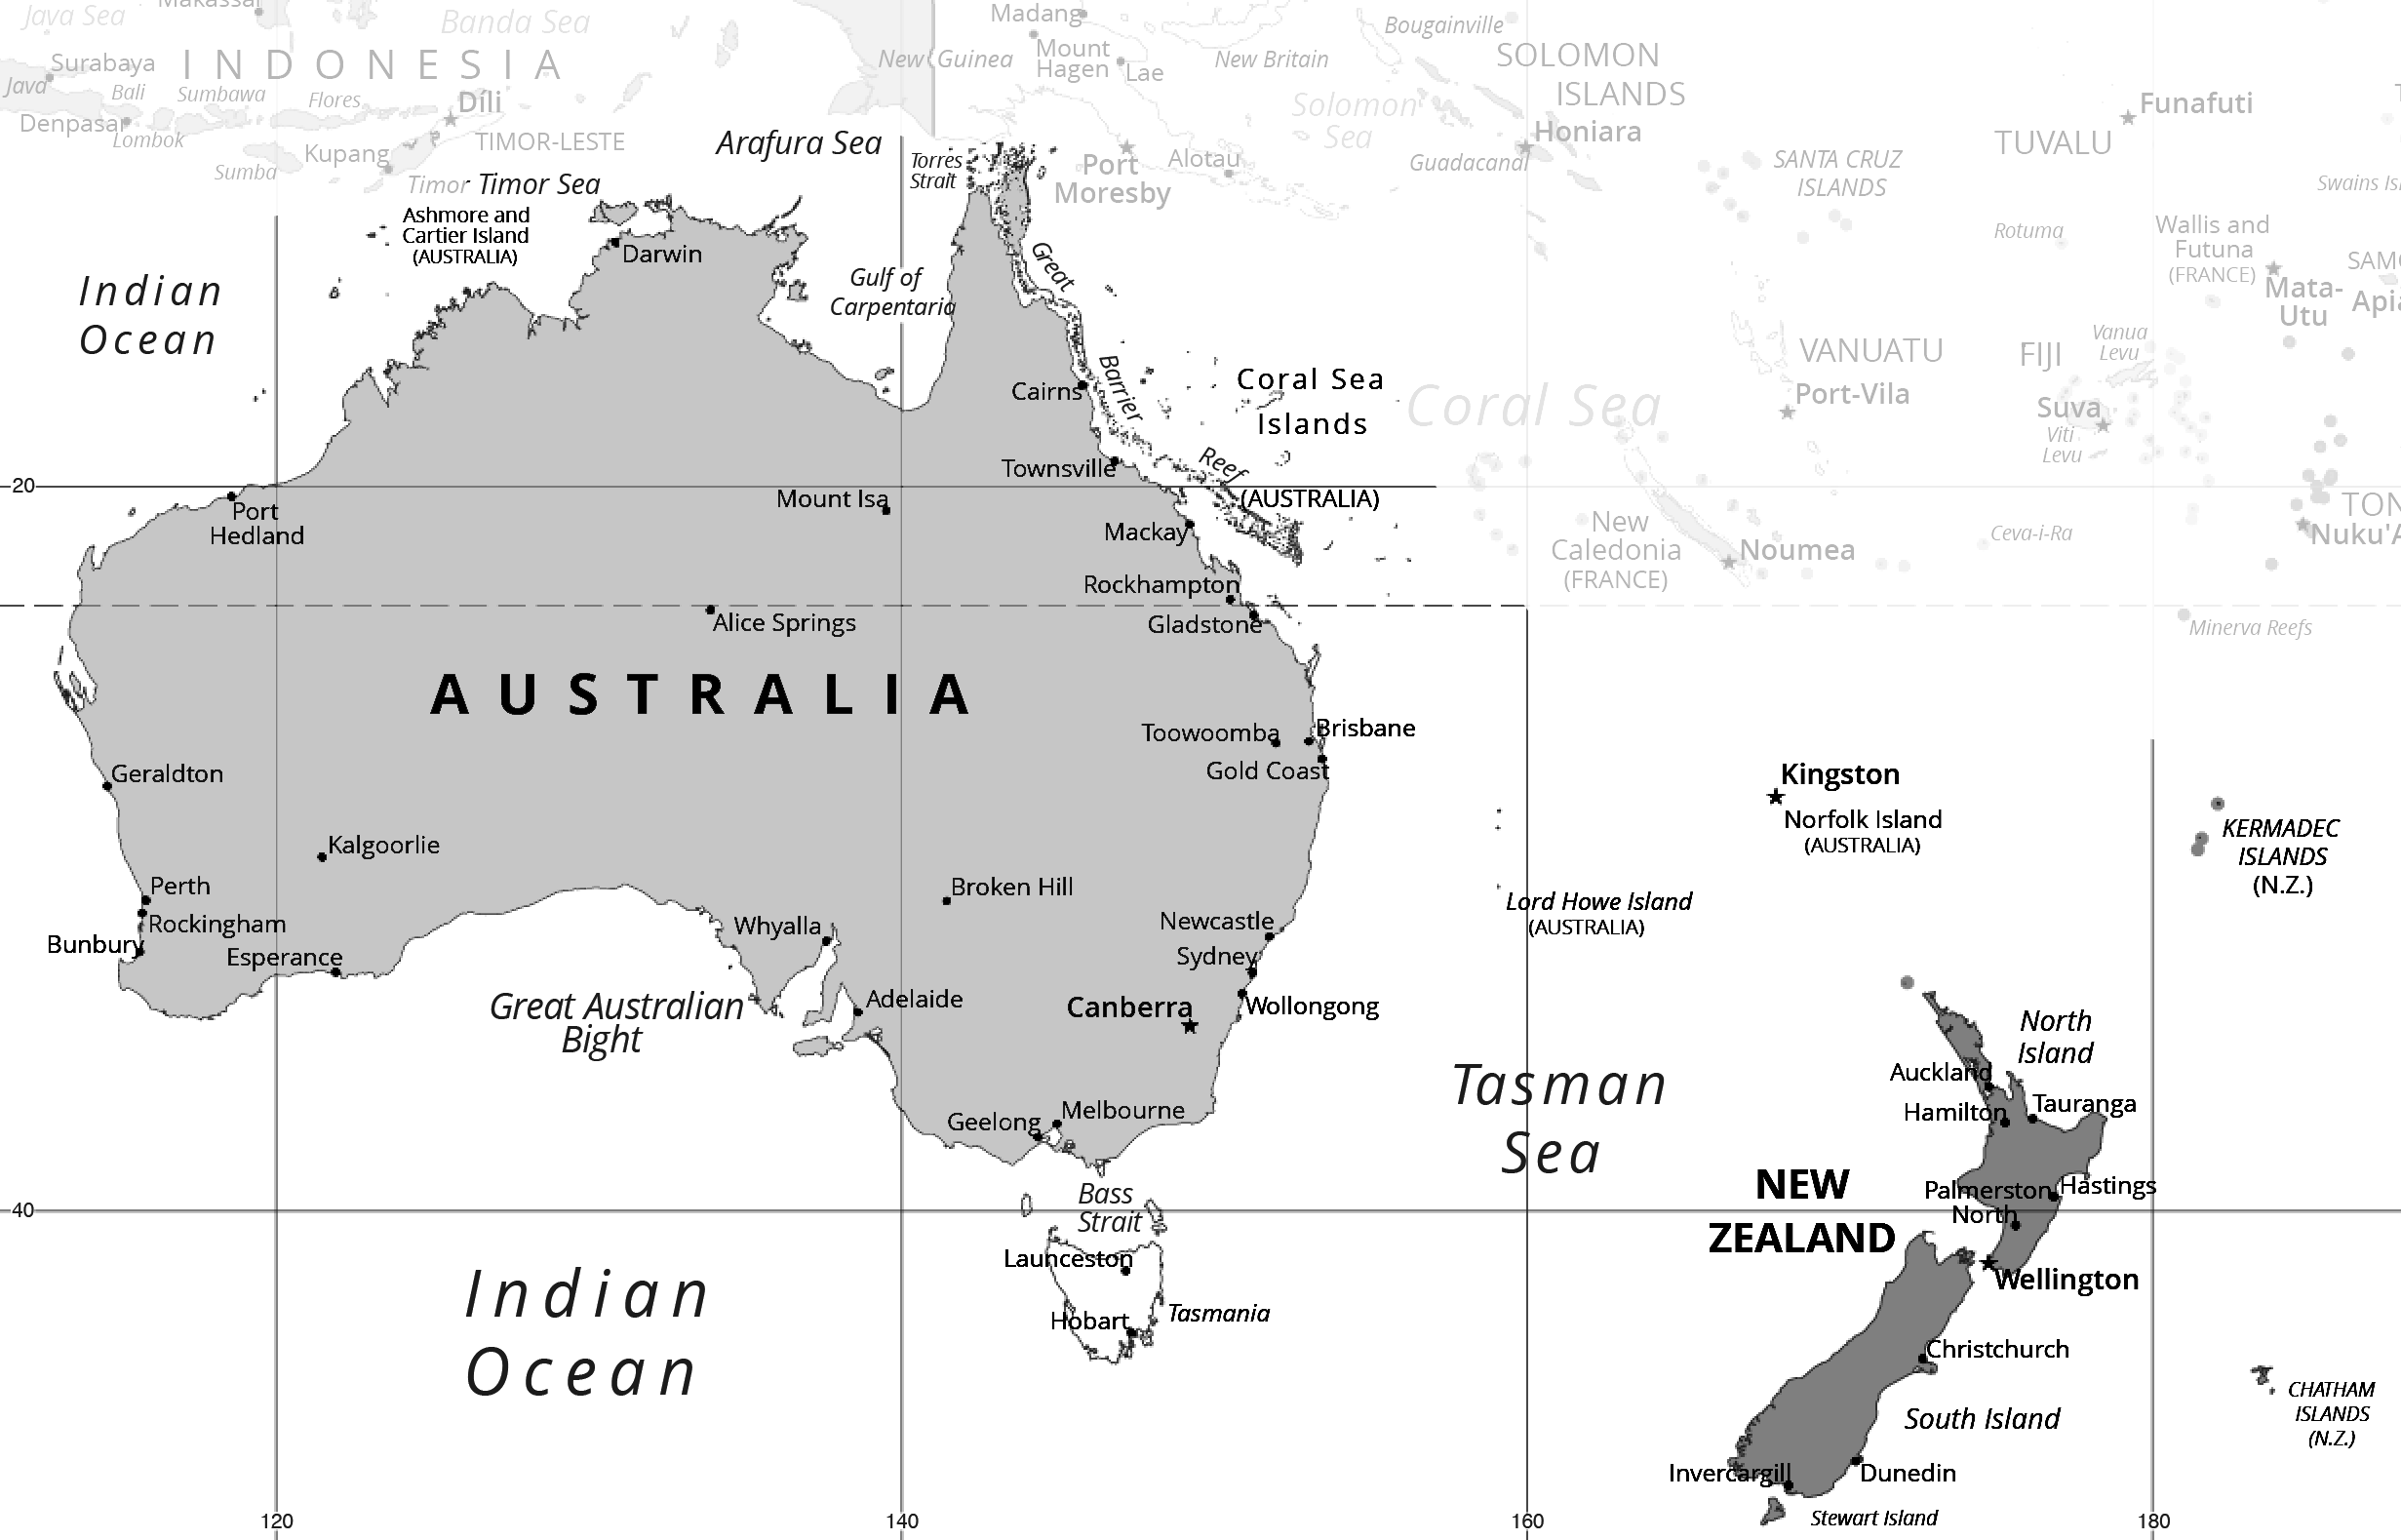 A black-and-white map of Australia and New Zealand.